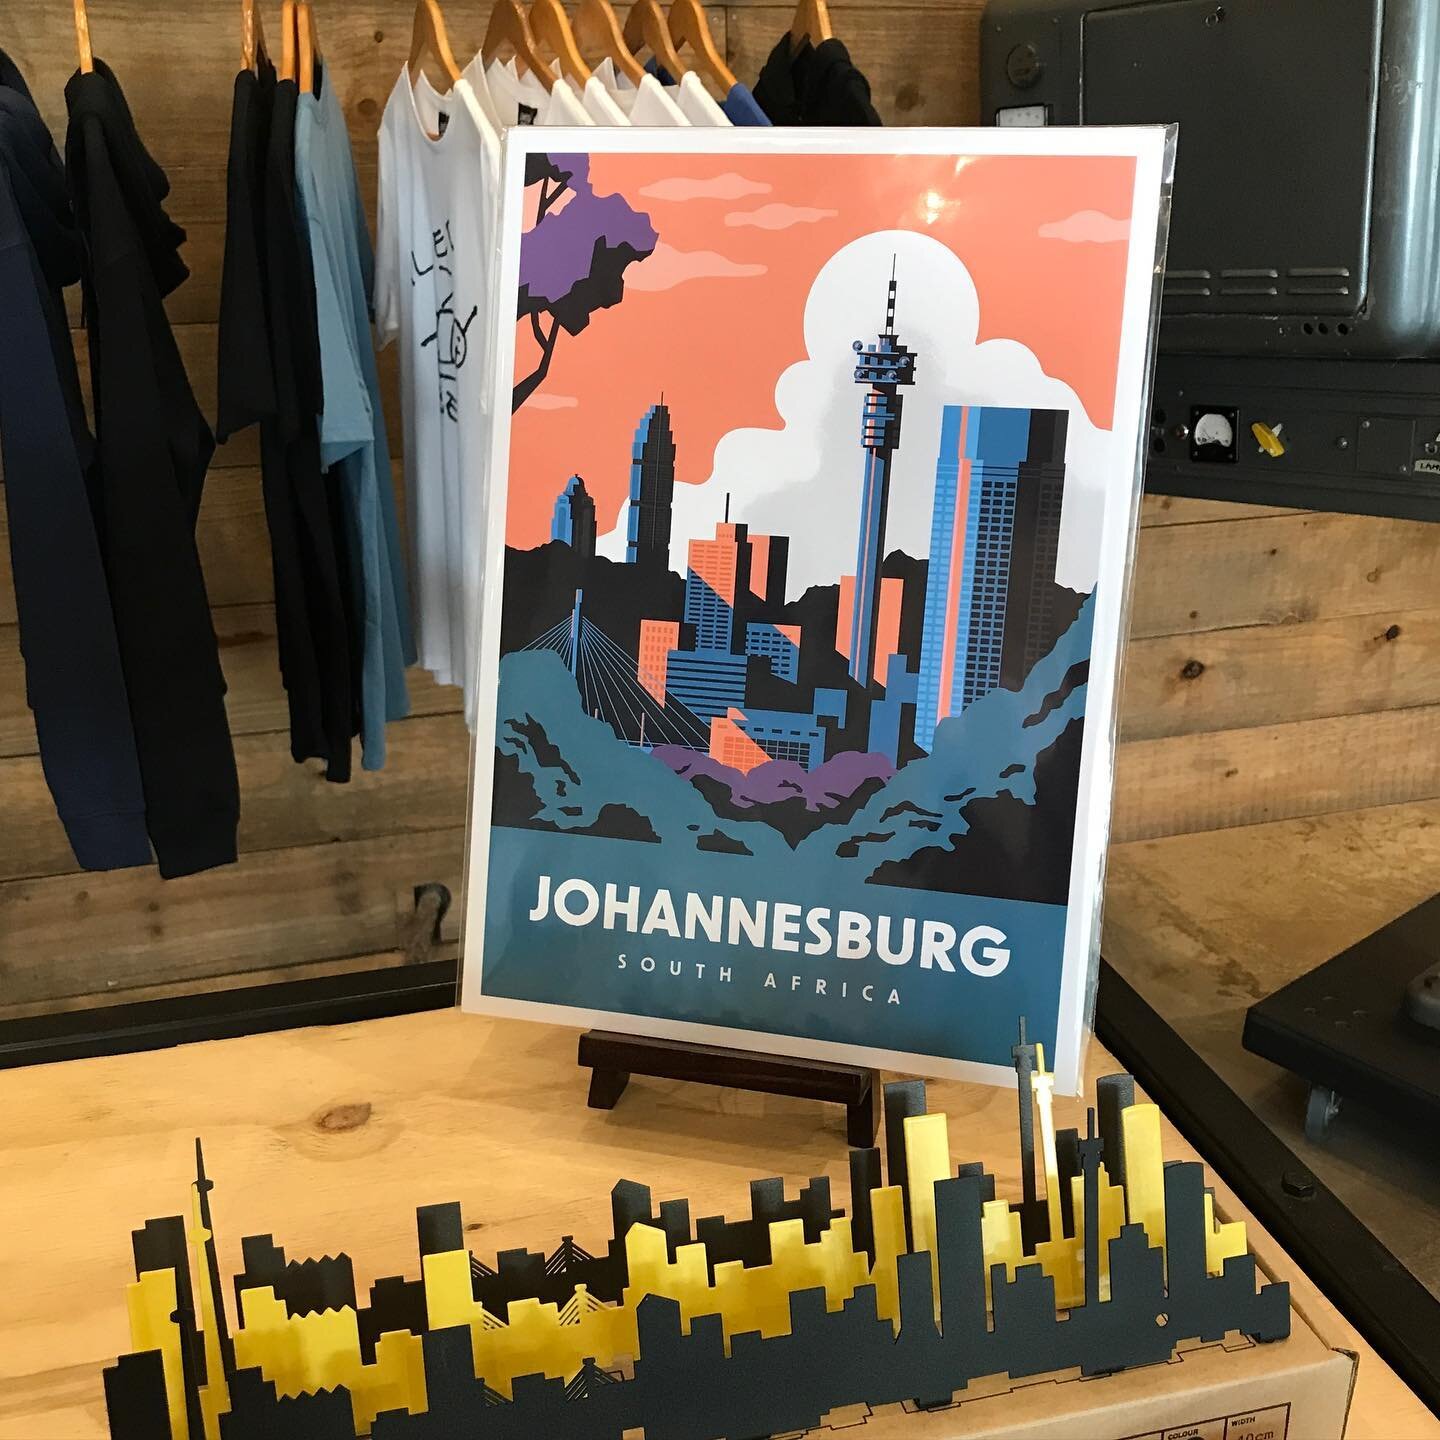 The Joburg poster we illustrated for @thebioscope and @limited_edish features Jacaranda trees! The city is currently covered in purple blooms, looking good and smelling nice. (We even spotted two white Jacarandas in Rosebank!) 

To purchase the Johan